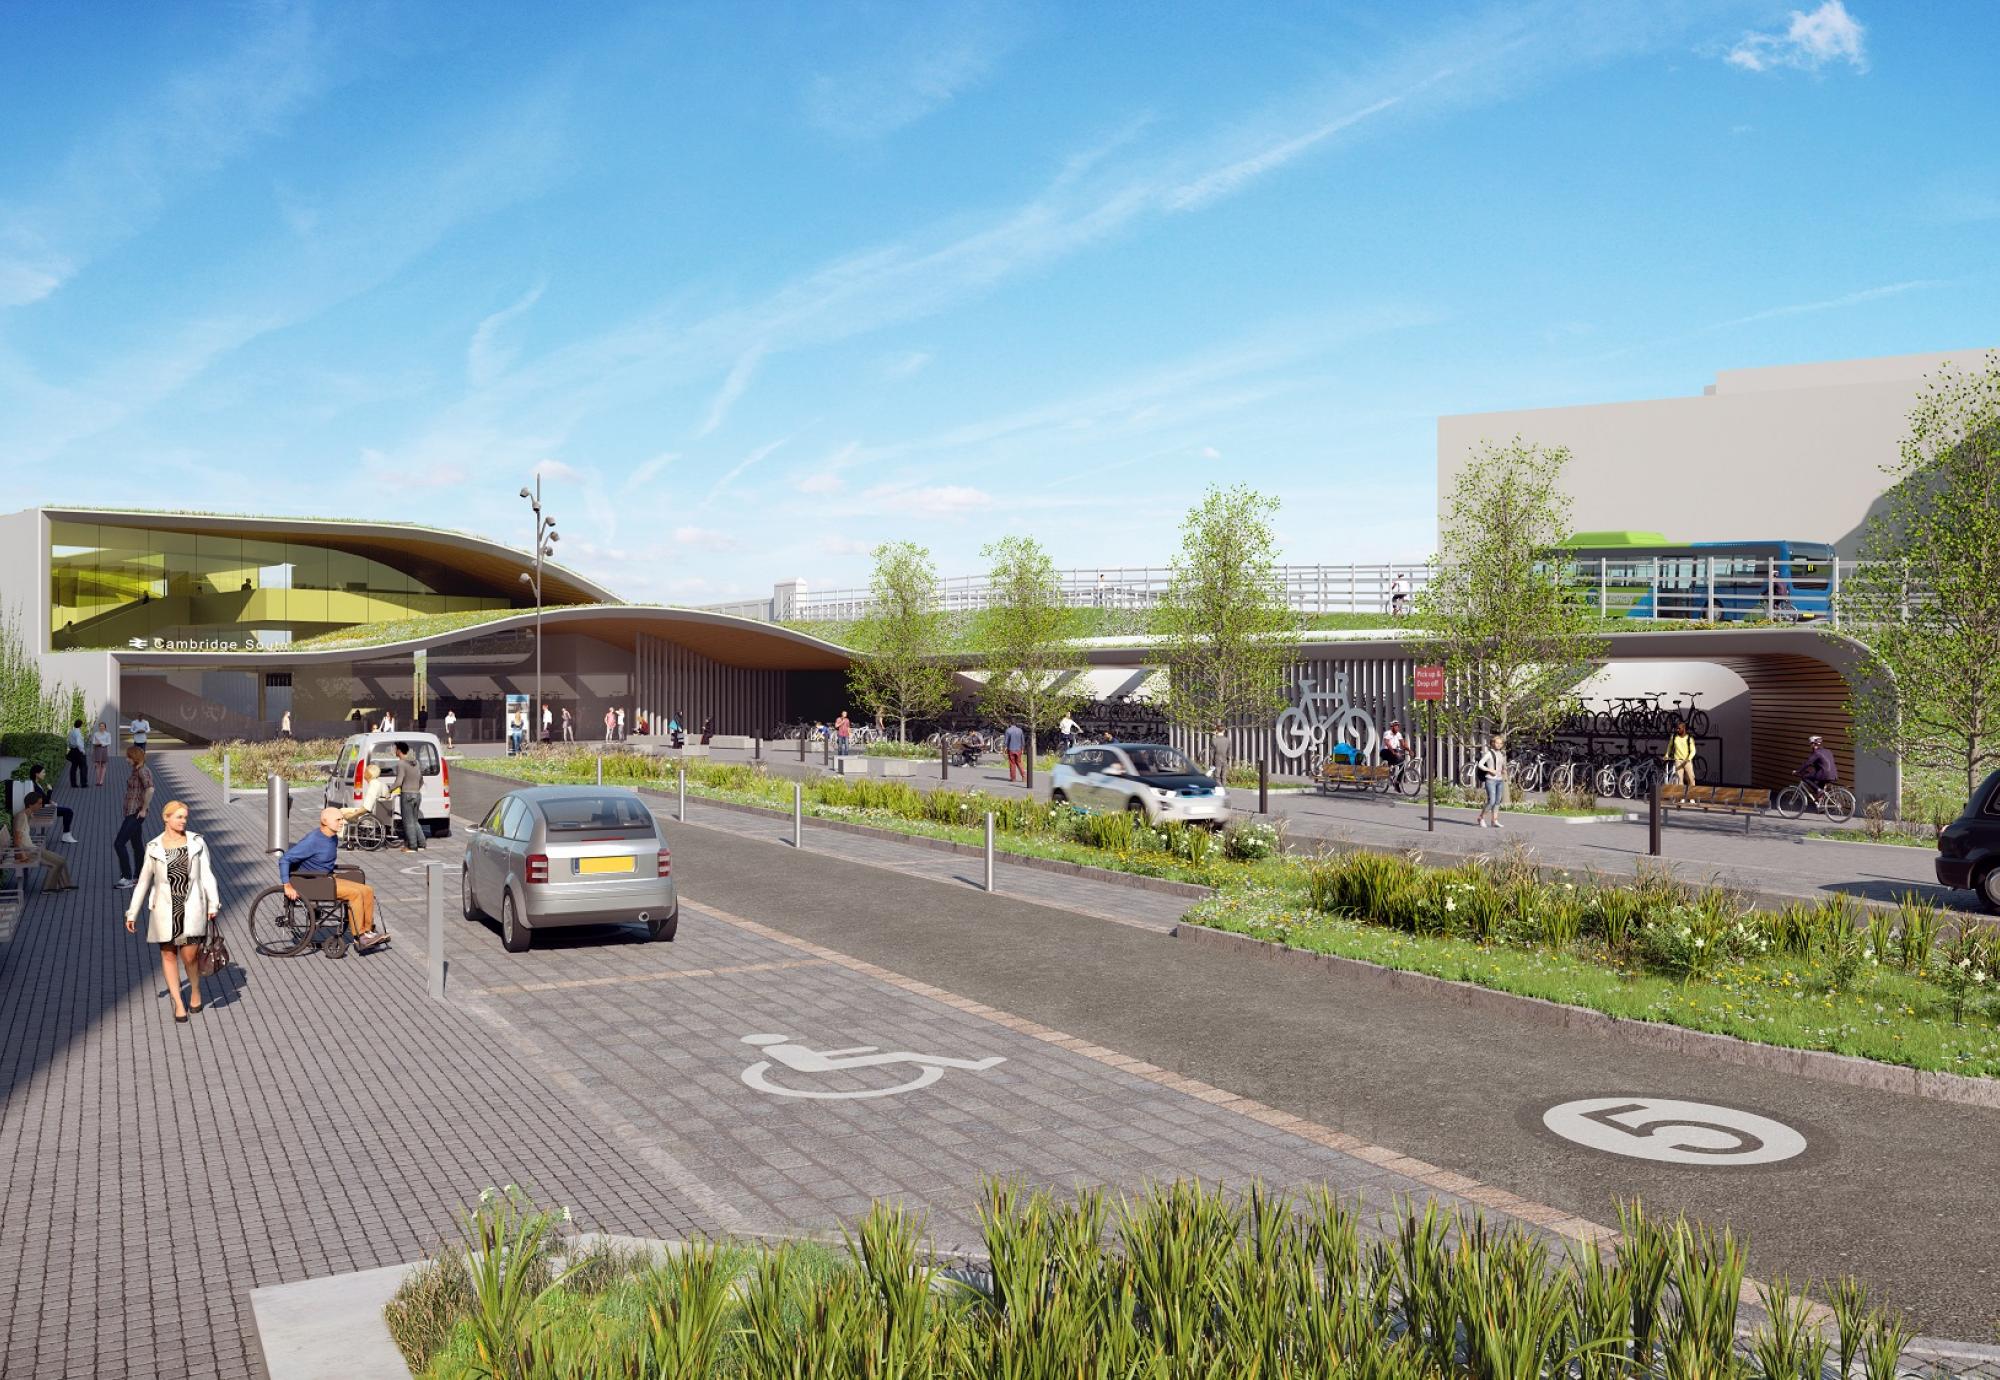 Government agrees to fund £200 million Cambridge South station as part of East West Rail